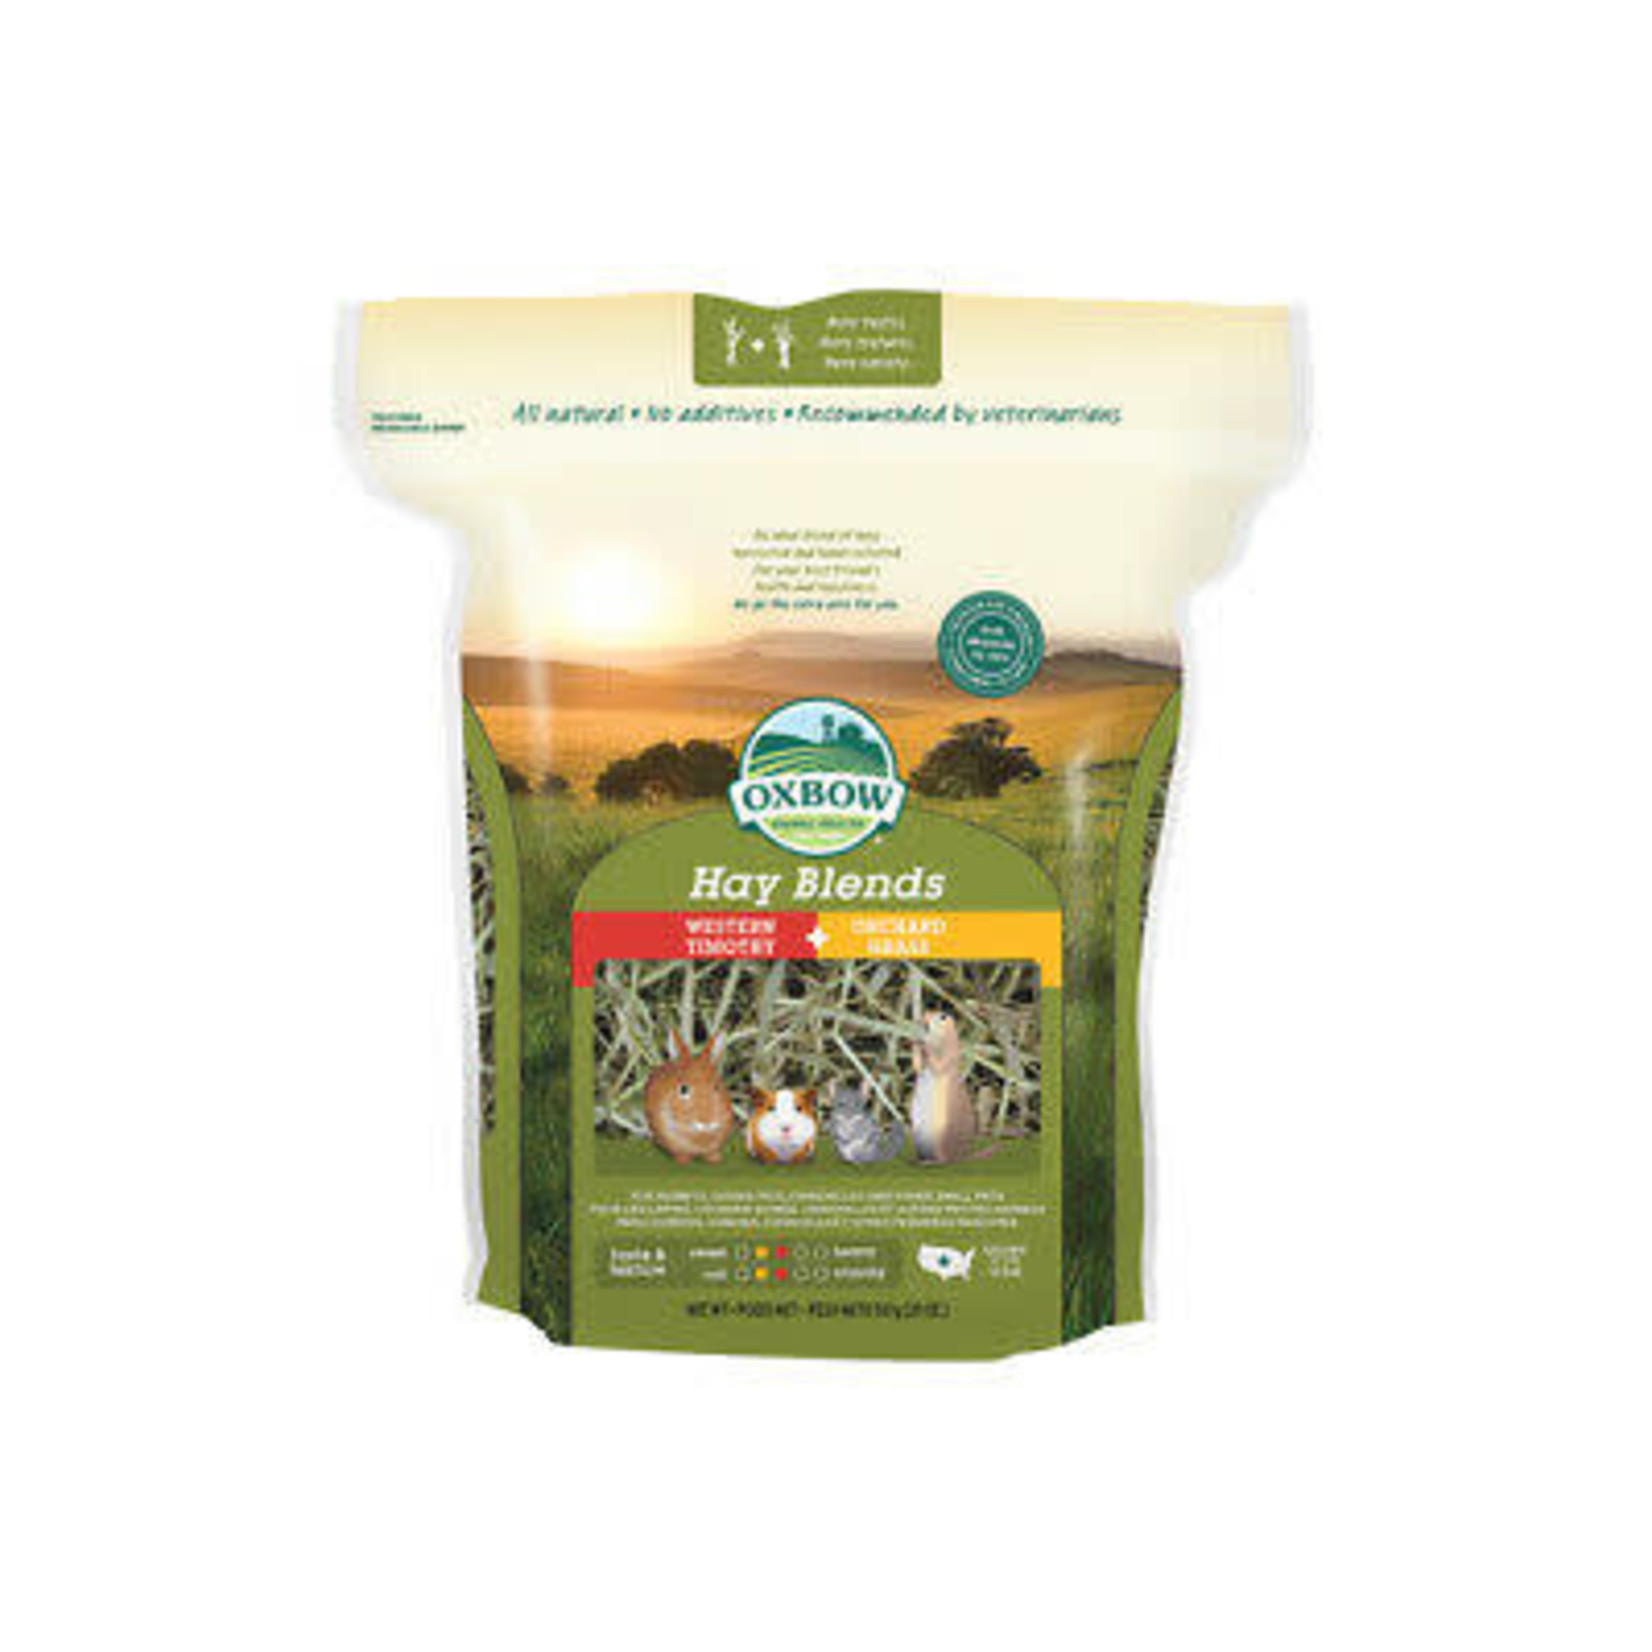 OXBOW ANIMAL HEALTH OXBOW Hay Blends Timothy/Orchard 20oz